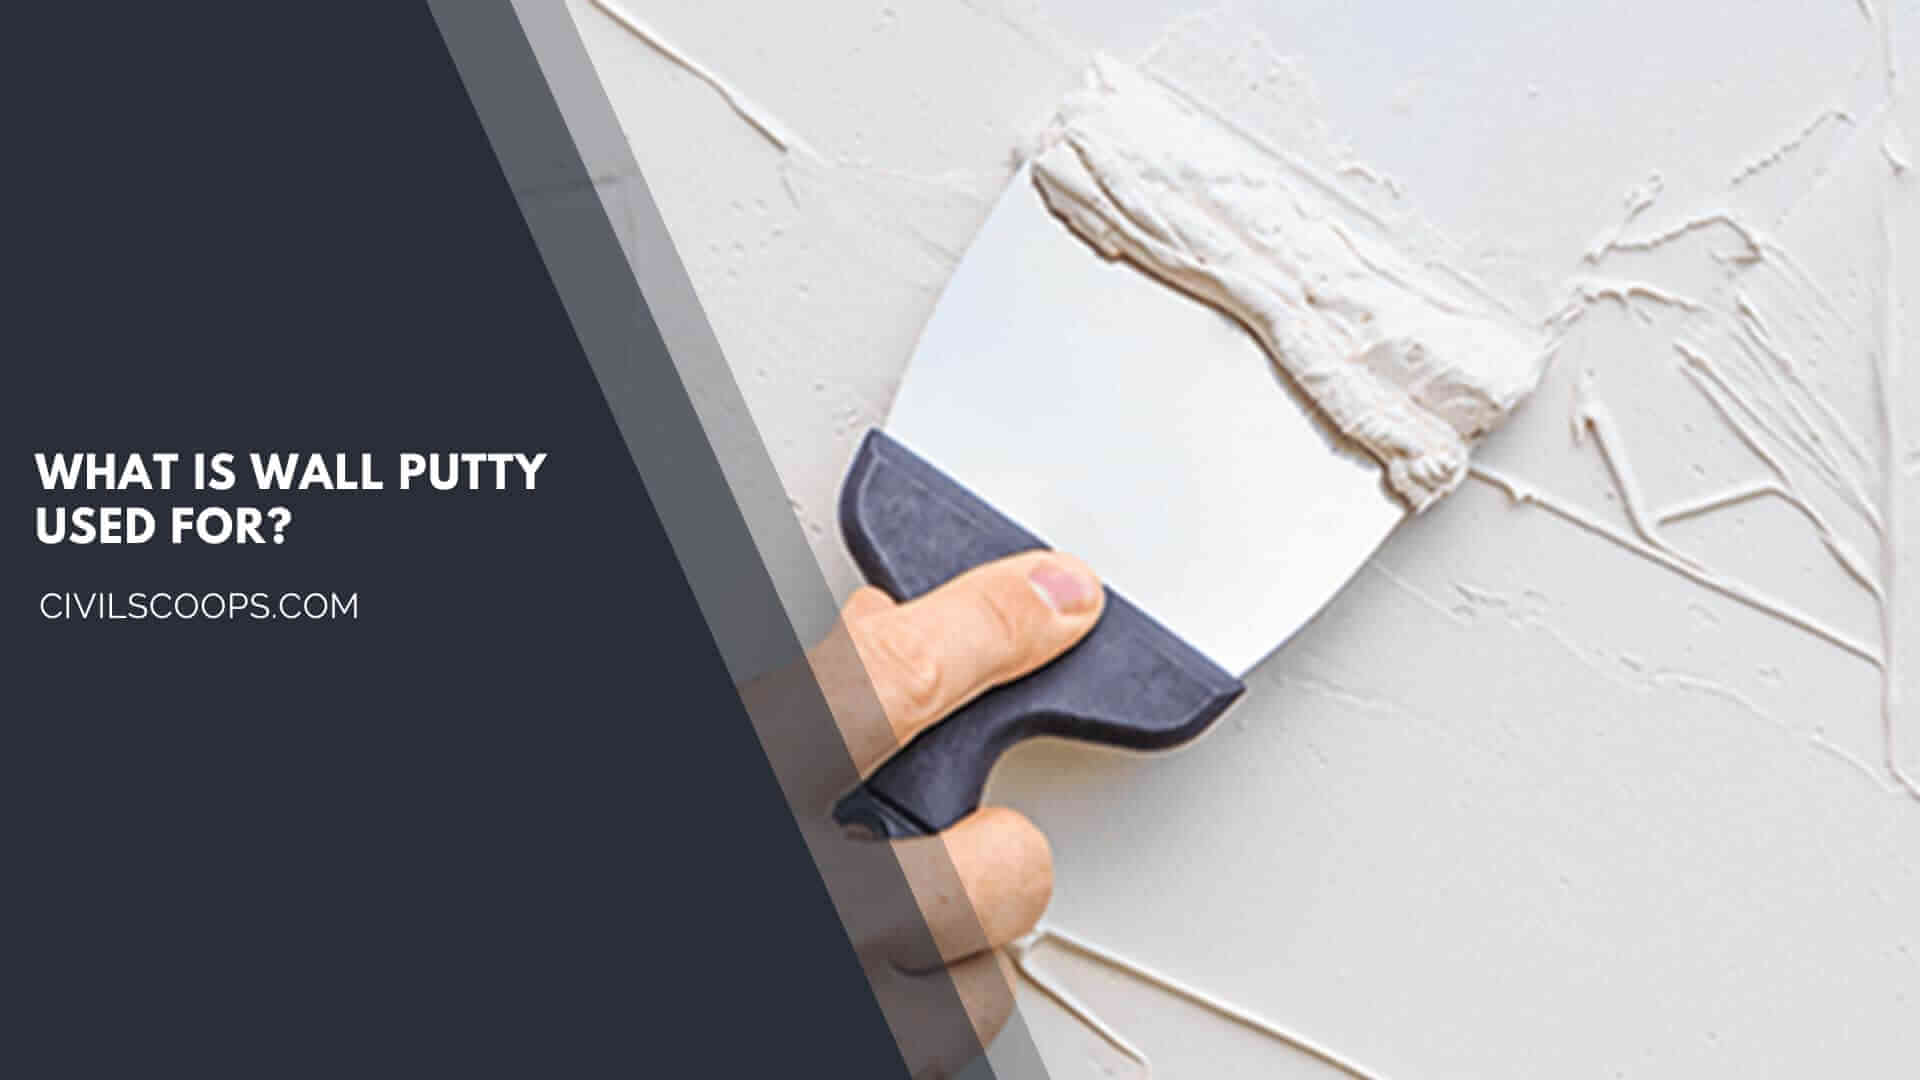 What Is Wall Putty Used For?